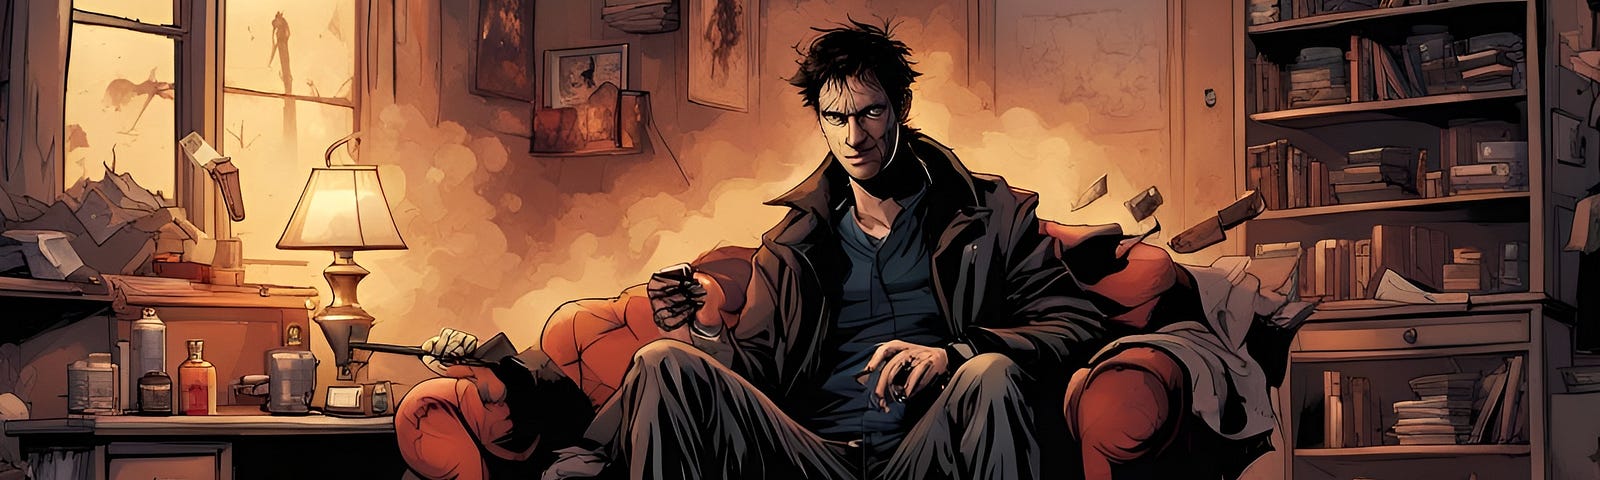 Nightcafe AI rendered image of Harry Dresden, the title character in Jim Butcher’s The Dresden Files book series. Dresden is pictured seated on a couch in a messy and damaged apartment.